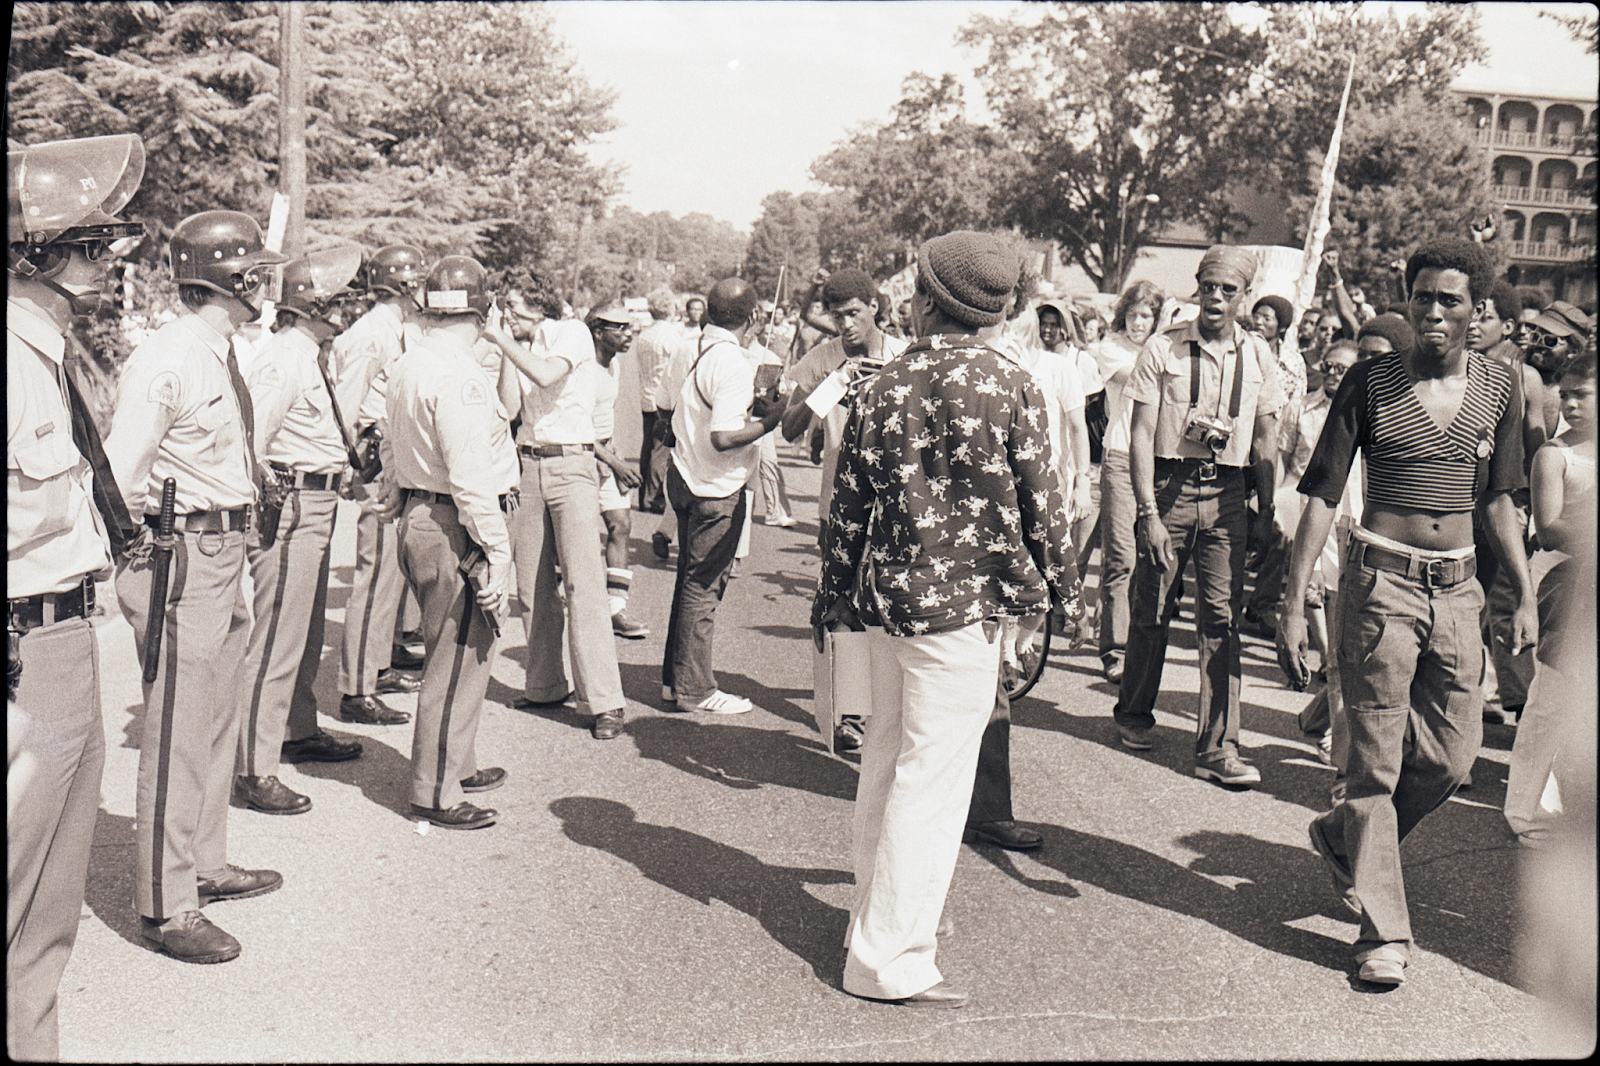 Protestors and police at protest against the death penalty, 1974.